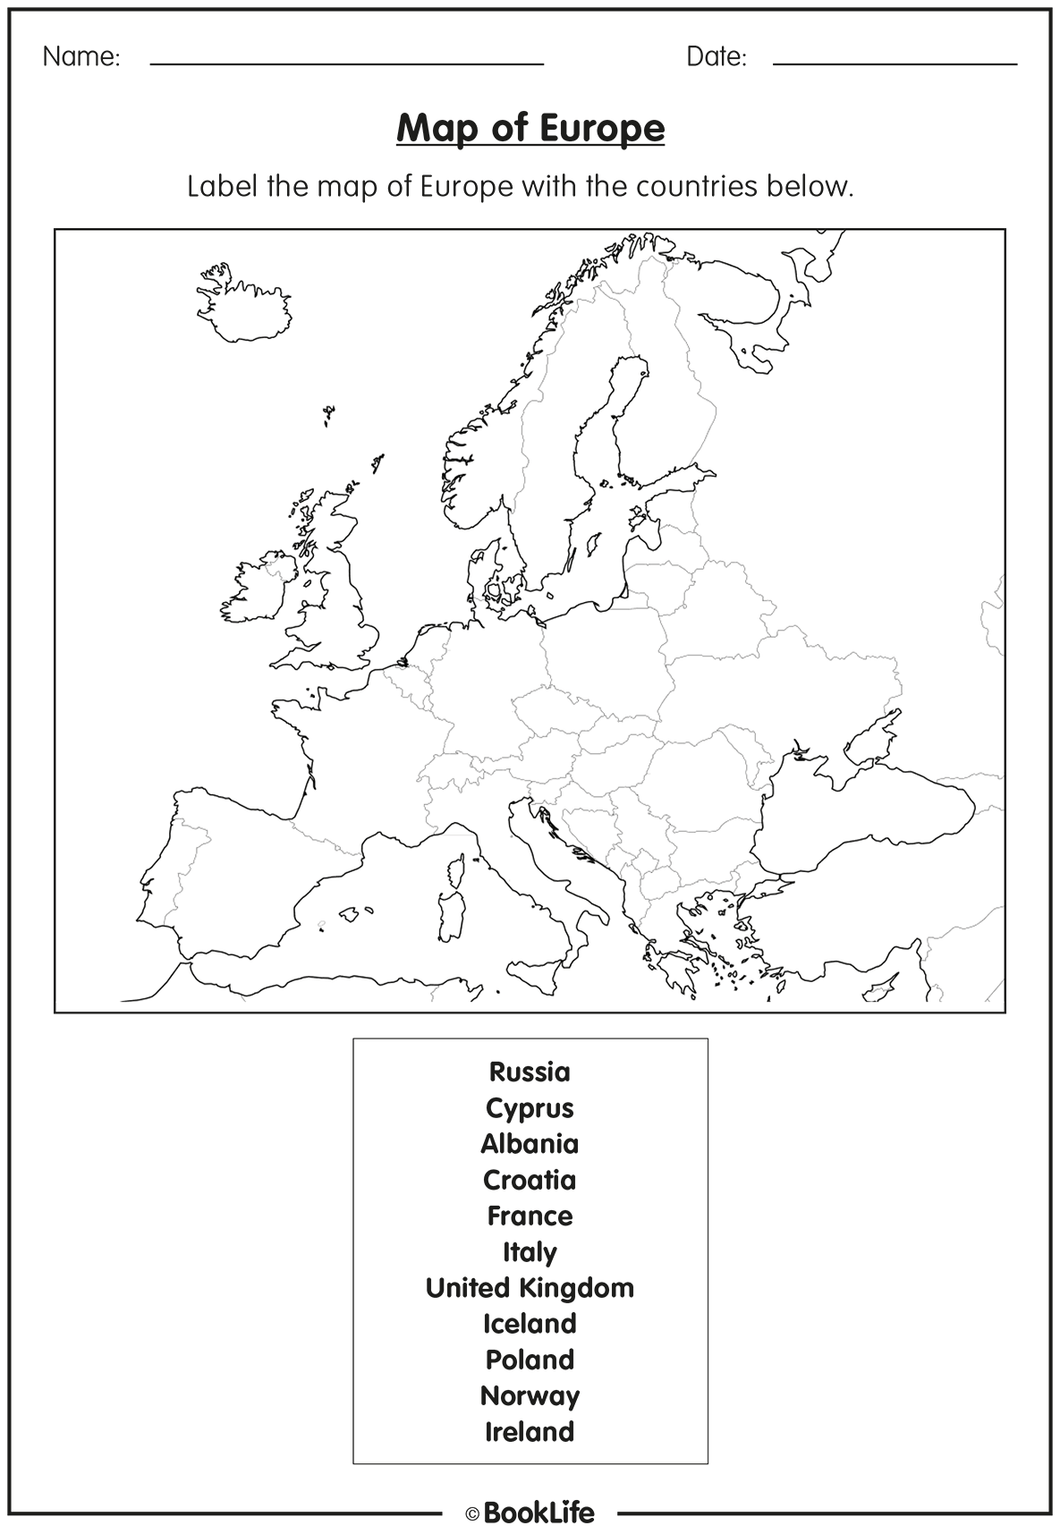 free-activity-sheet-map-of-europe-booklife